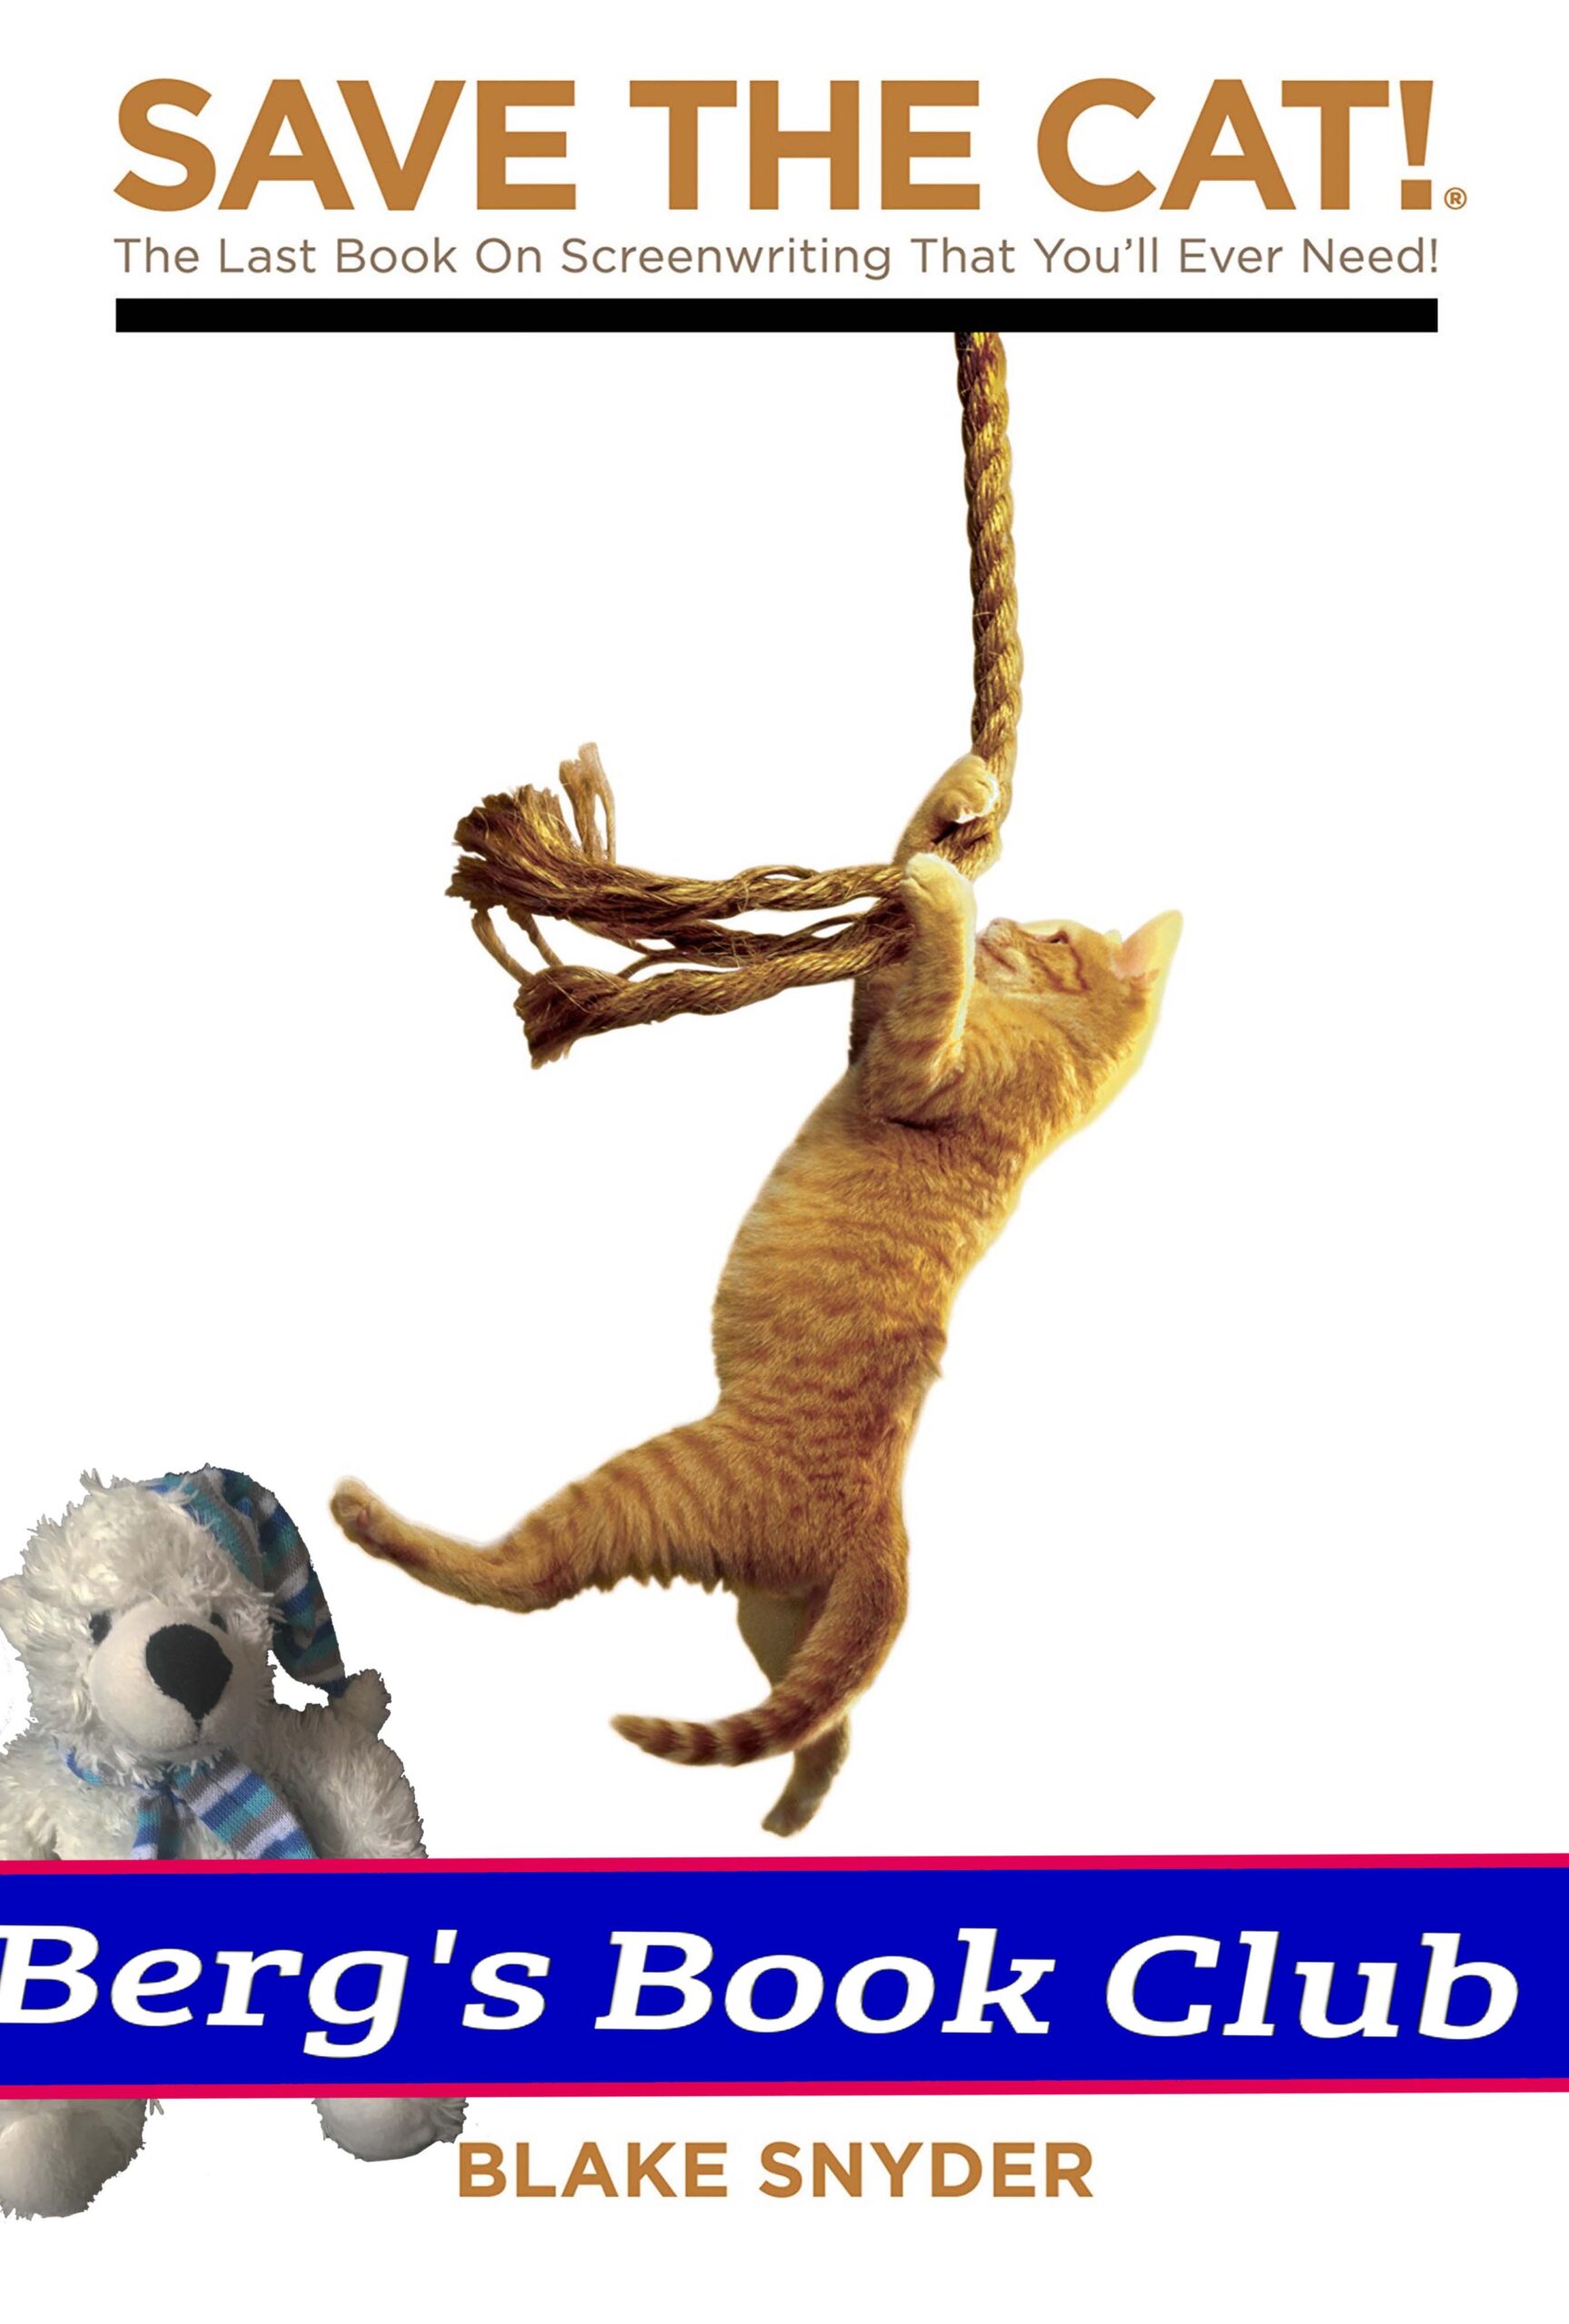 Save the Cat Book cover. Cat on Rope Swing. Banner reads: Berg's Book Club. Berg the polar bear teddy is underneath the cat. Cat inches away from kickig him